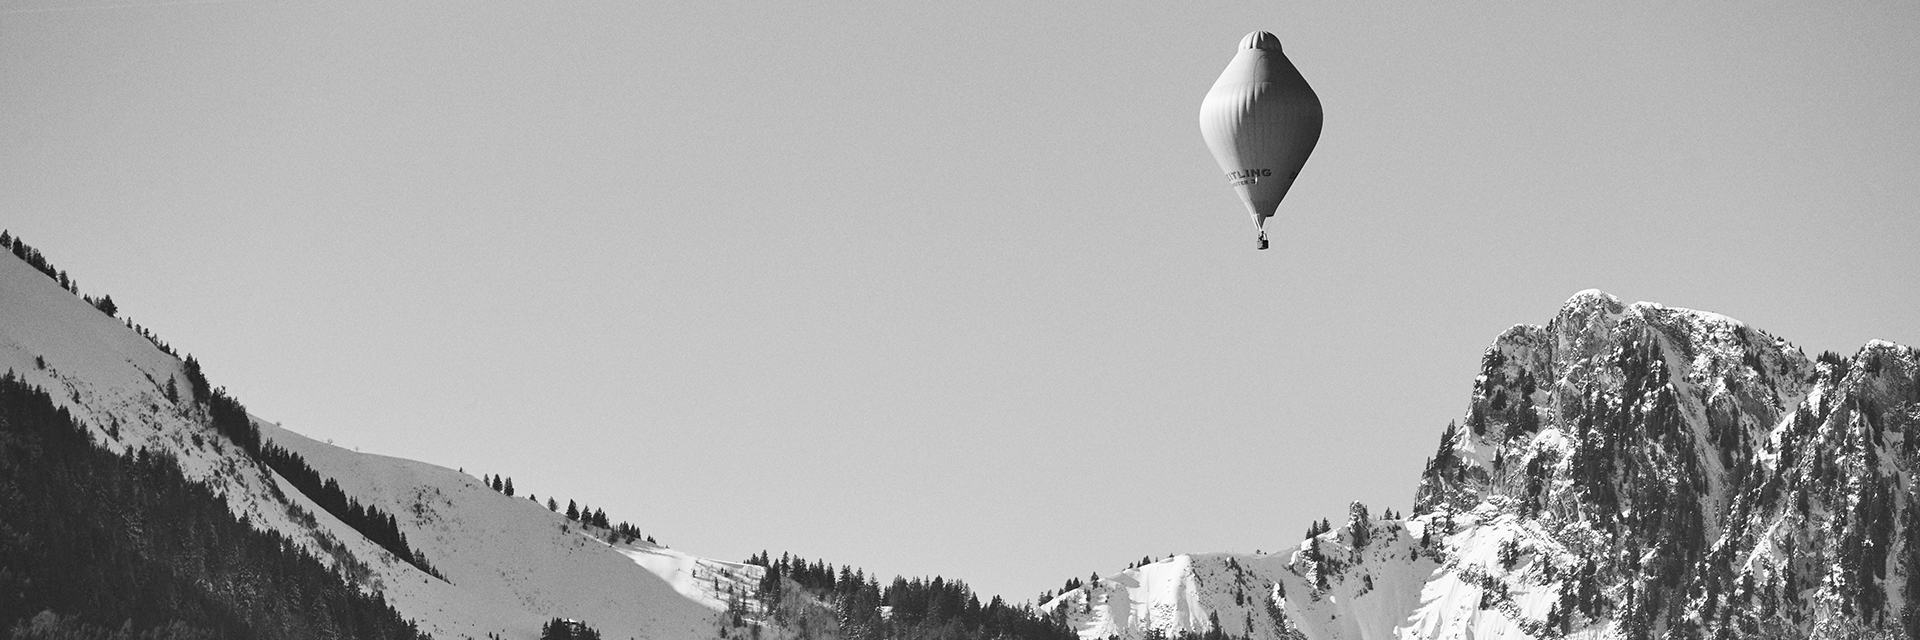 a blimp flying over snowy mountains